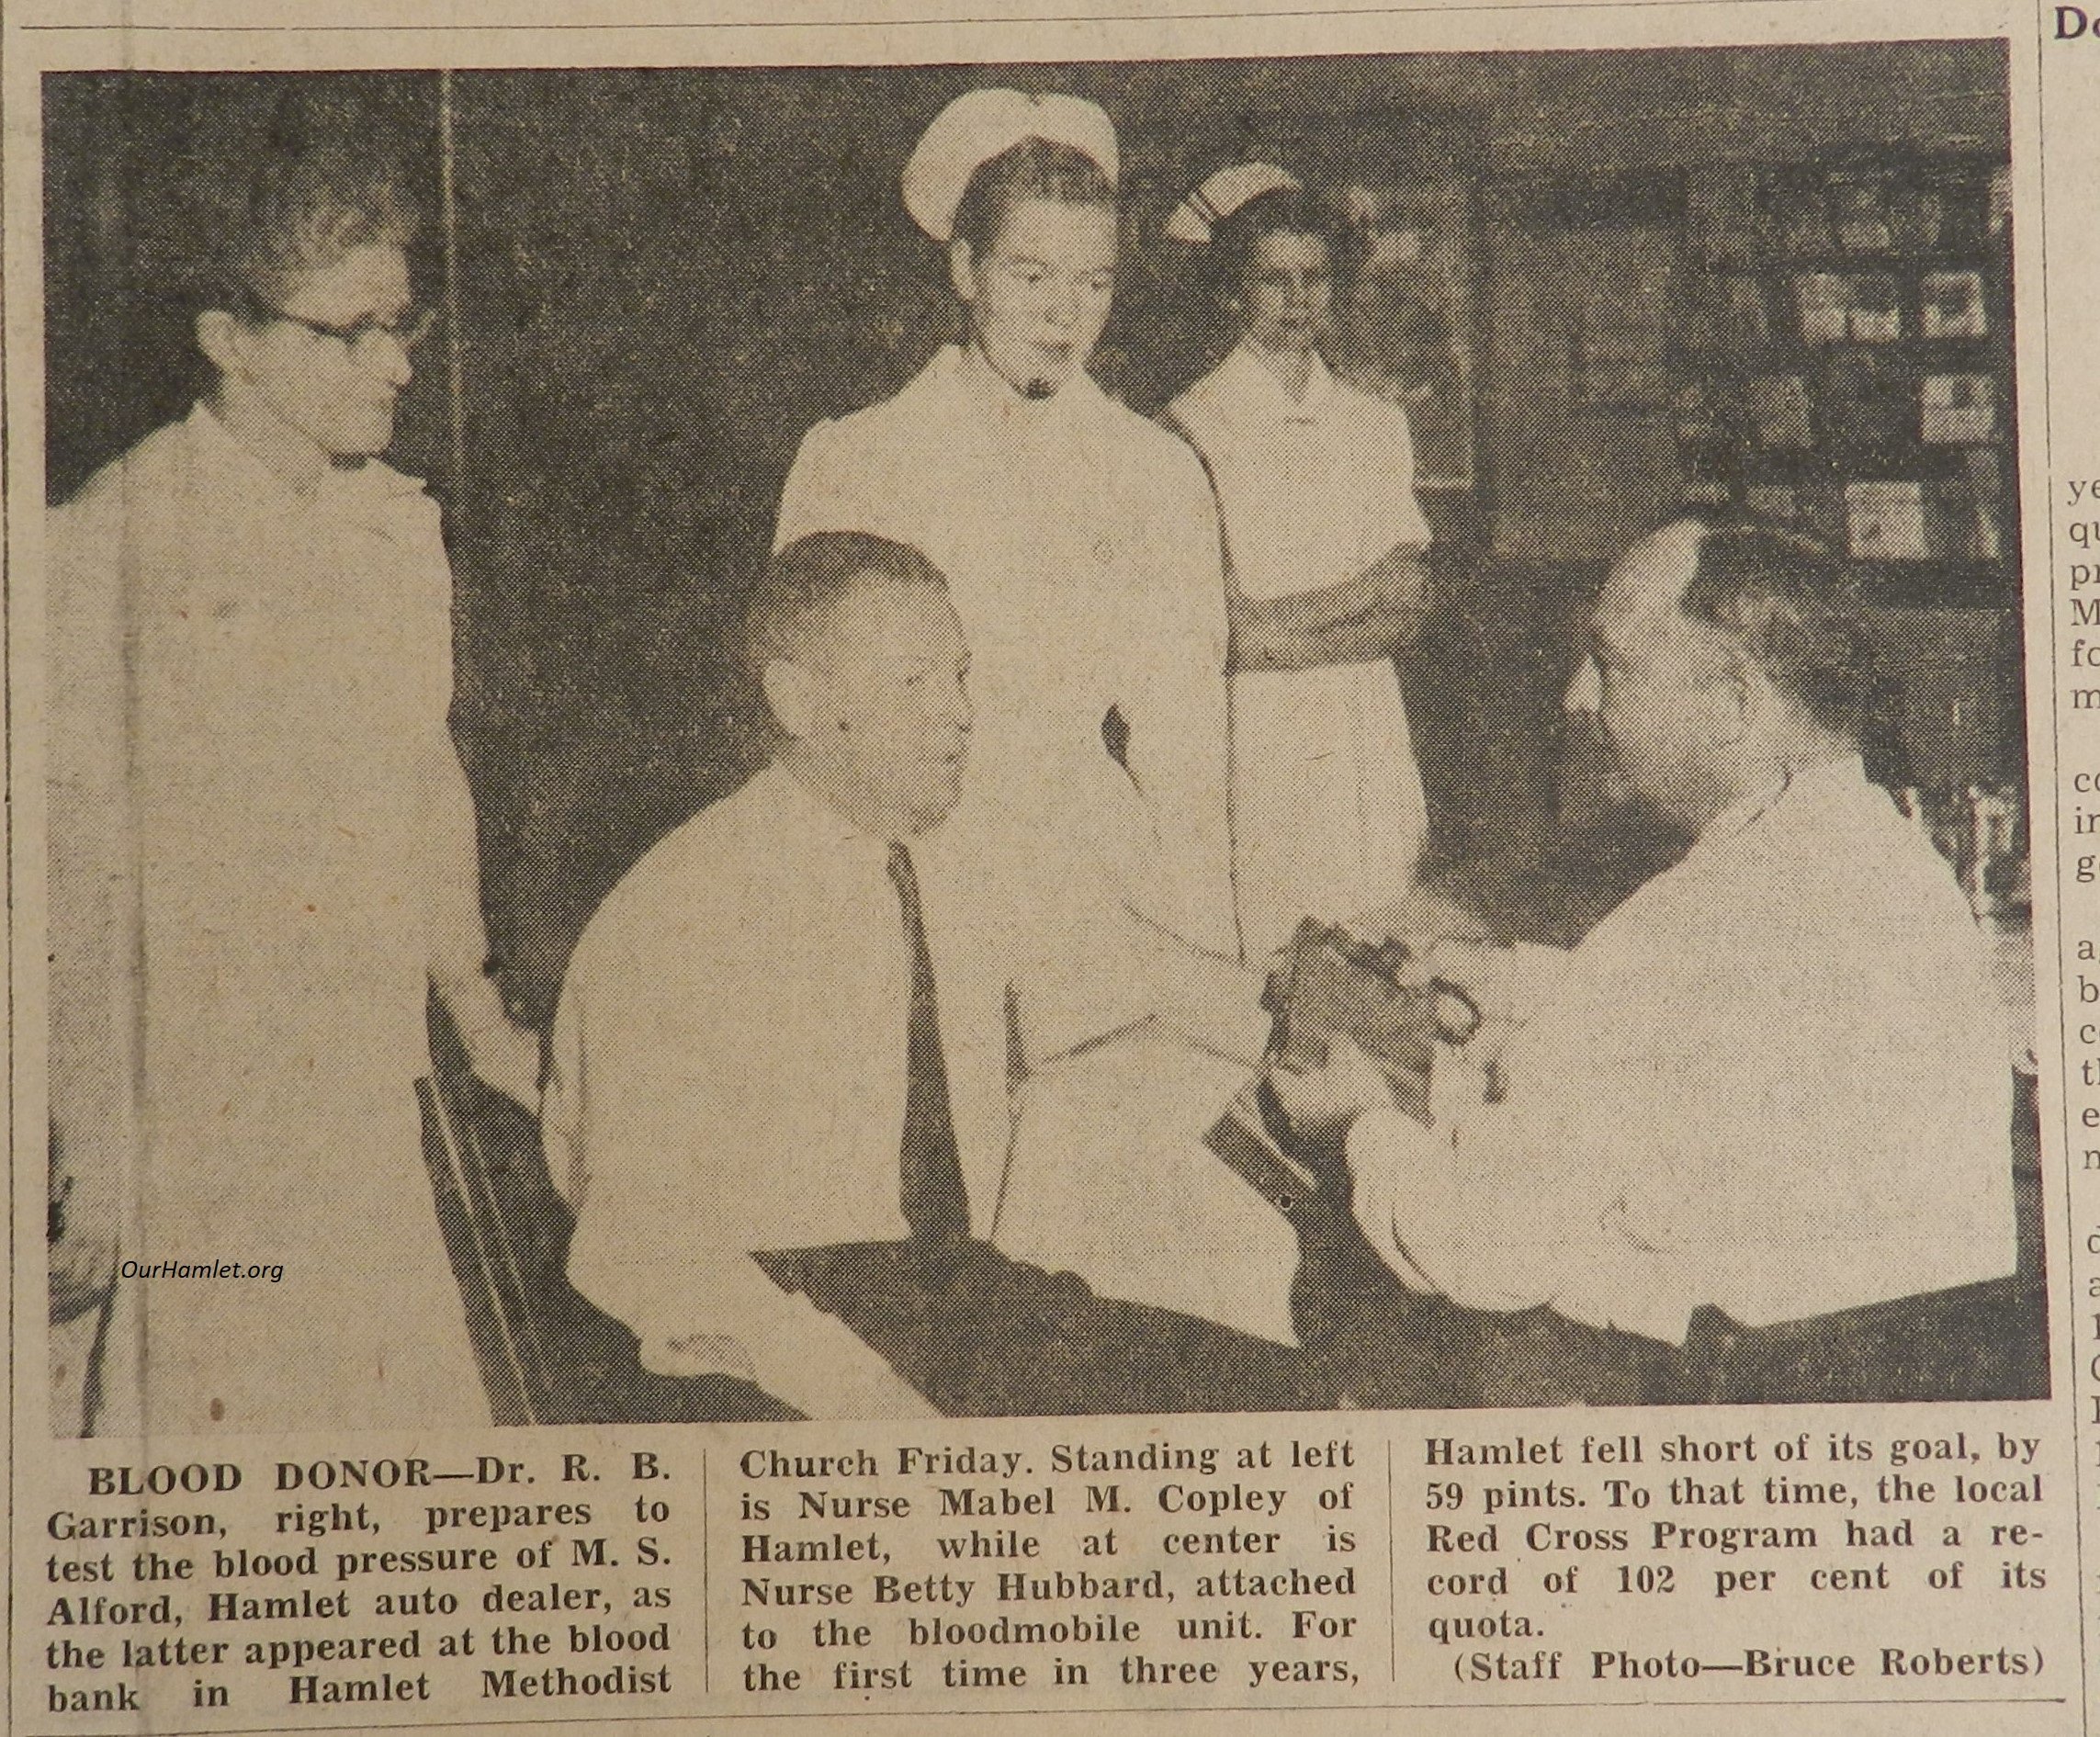 1953 Blood donor OH.jpg